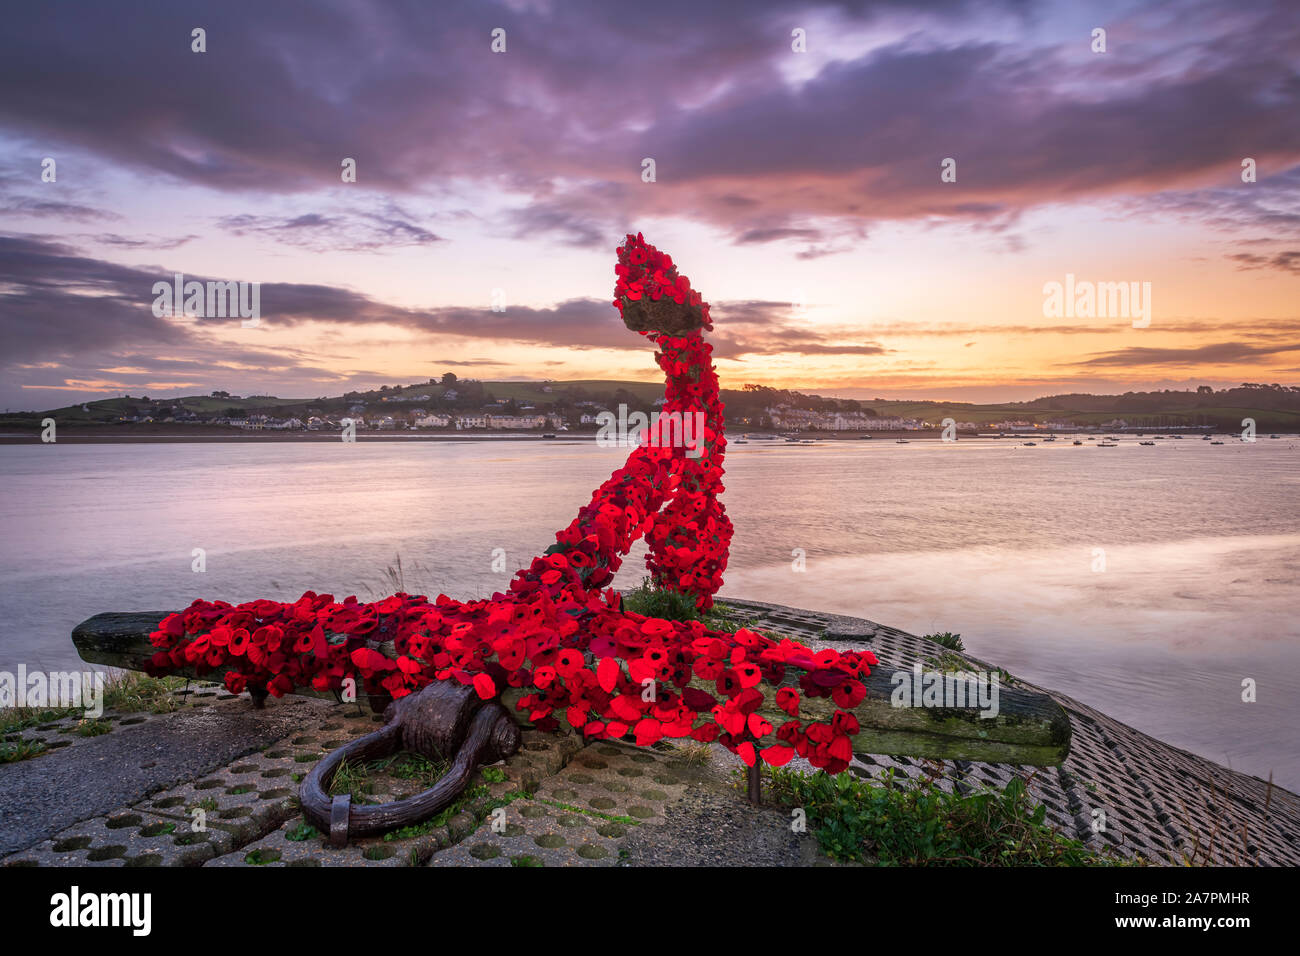 Appledore, North Devon, England. Monday 4th November 2019. UK Weather. Heavy cloud starts to build up just before sunrise as heavy showers are forecast for North Devon at the start of Remembrance week. The landmark anchor at Appledore has been covered by the local community with knitted poppies in preparation for the forthcoming Remembrance Sunday. Terry Mathews/Alamy Live News. Stock Photo